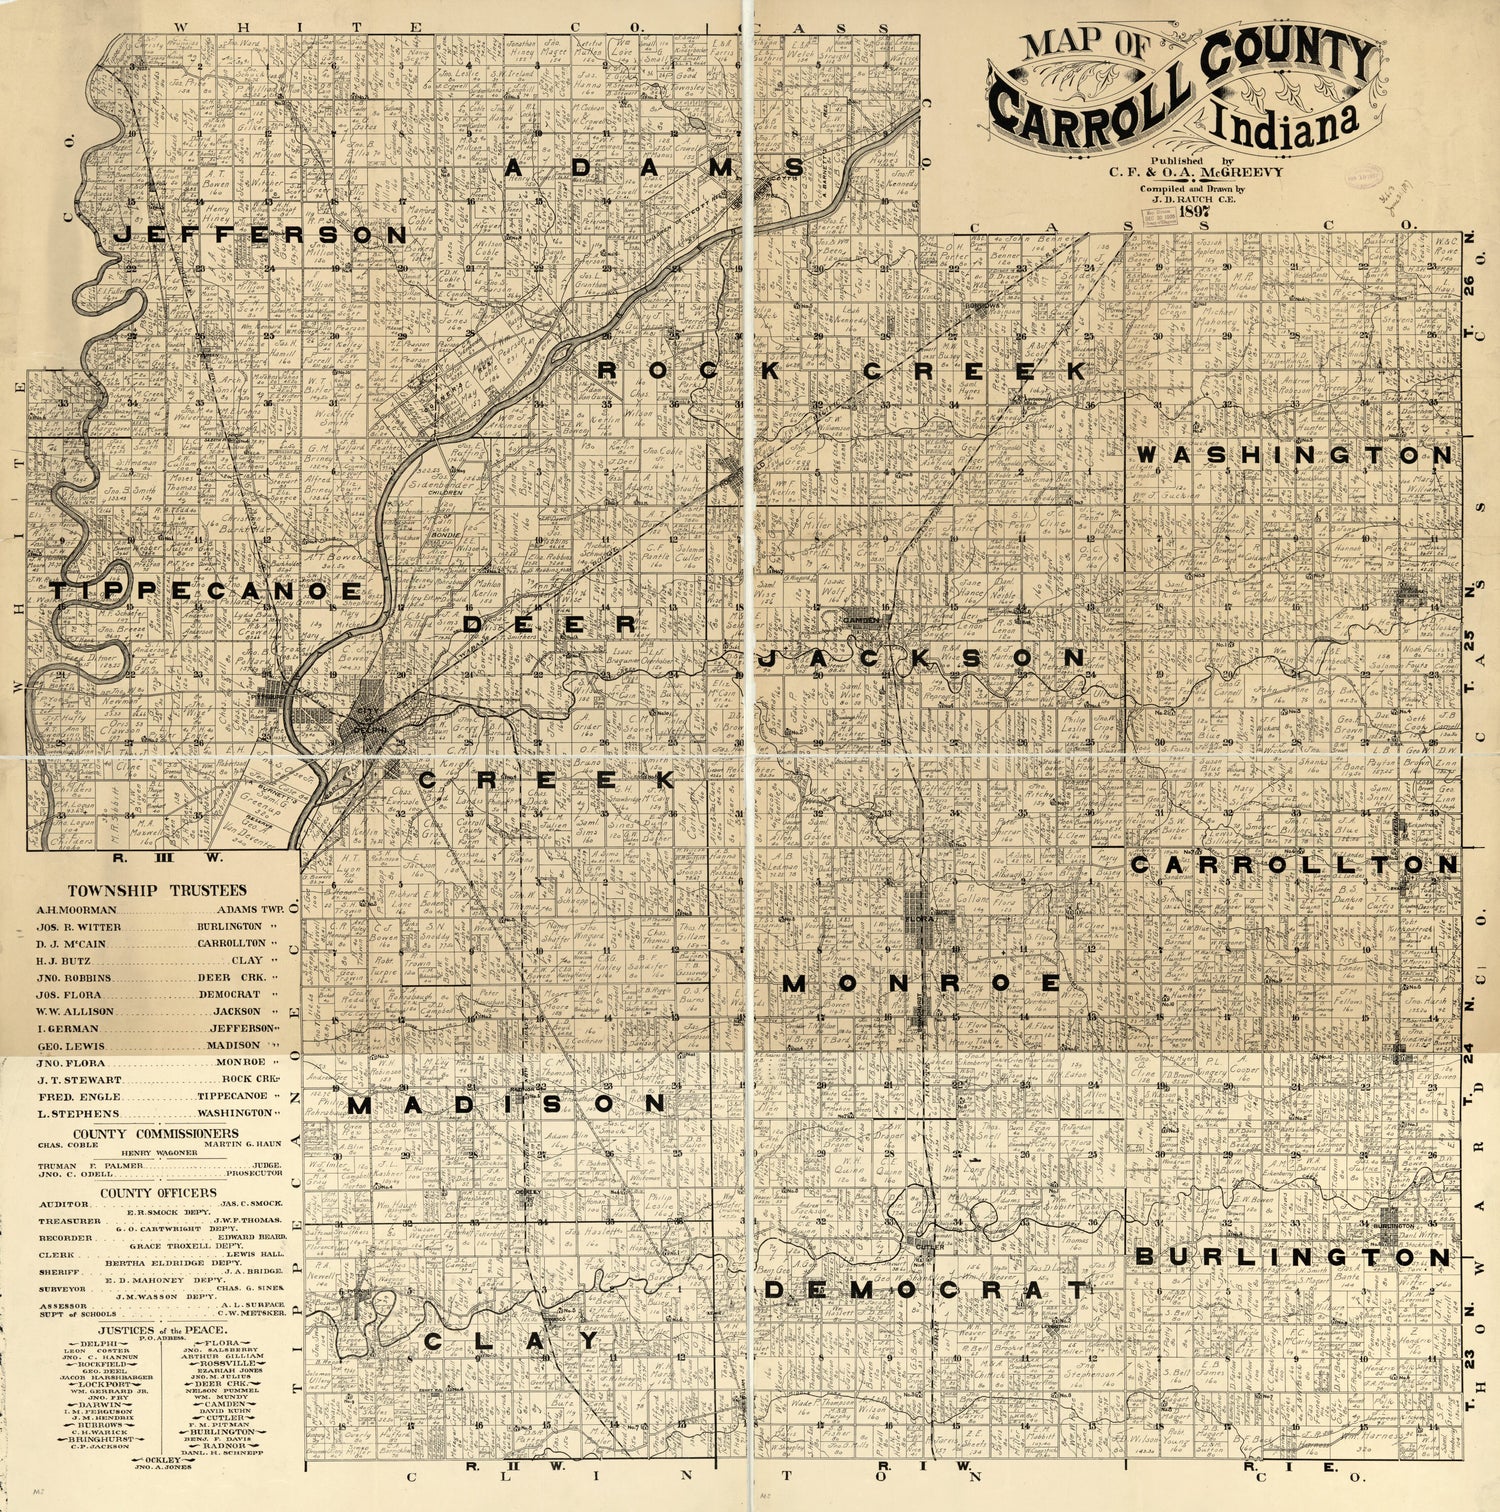 This old map of Map of Carroll County, Indiana from 1897 was created by J. D. Rauch in 1897